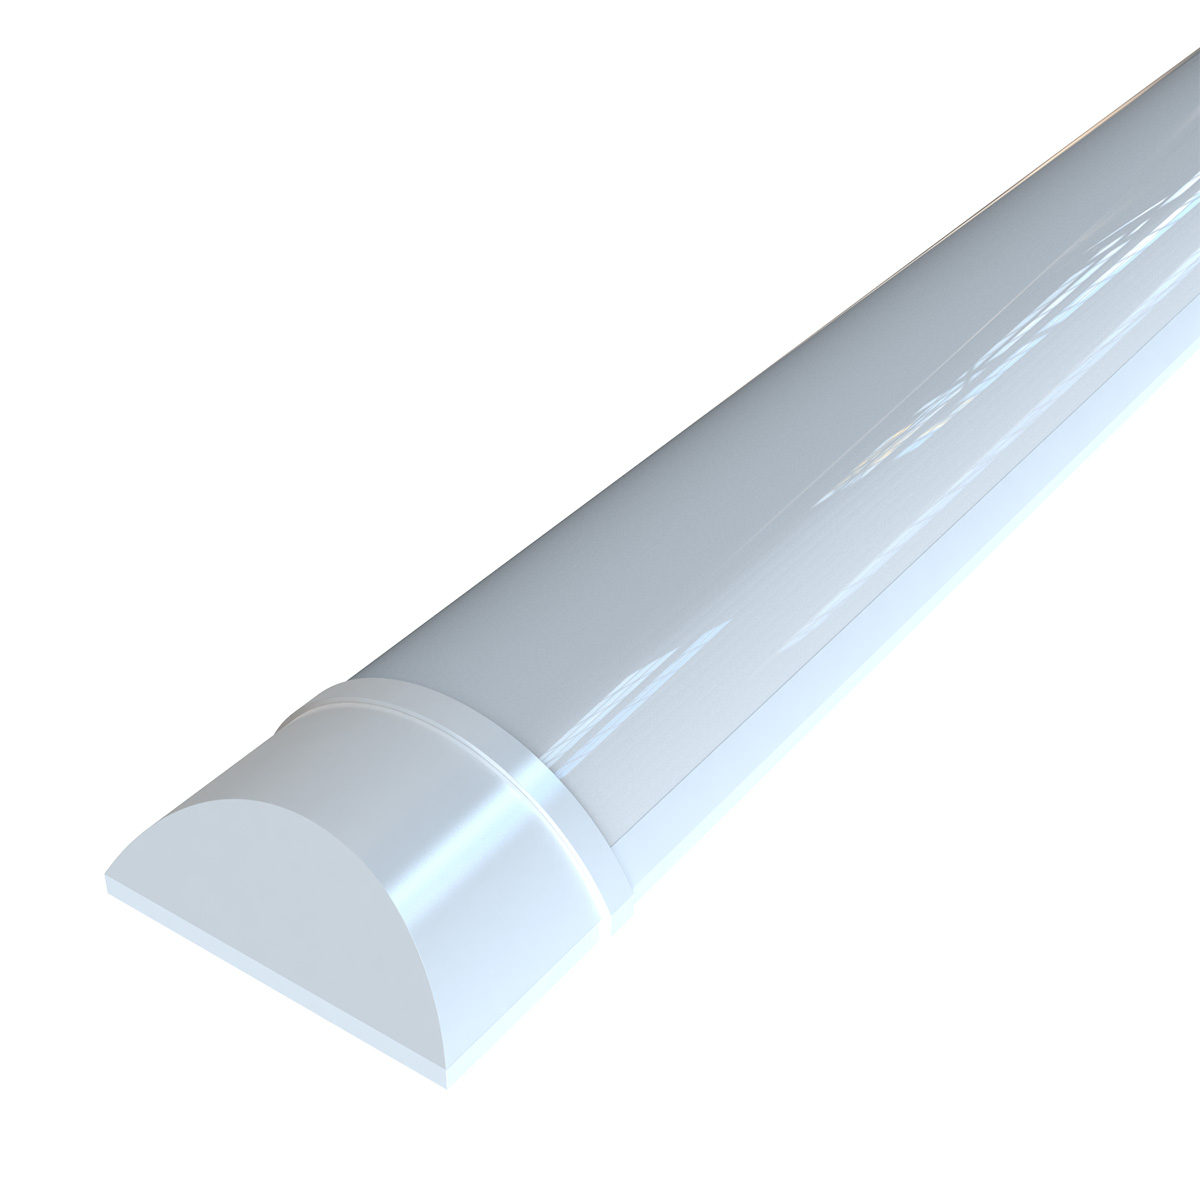 View 2 Foot 600mm LED Batten 20w 4000K Natural White With Samsung Chips information